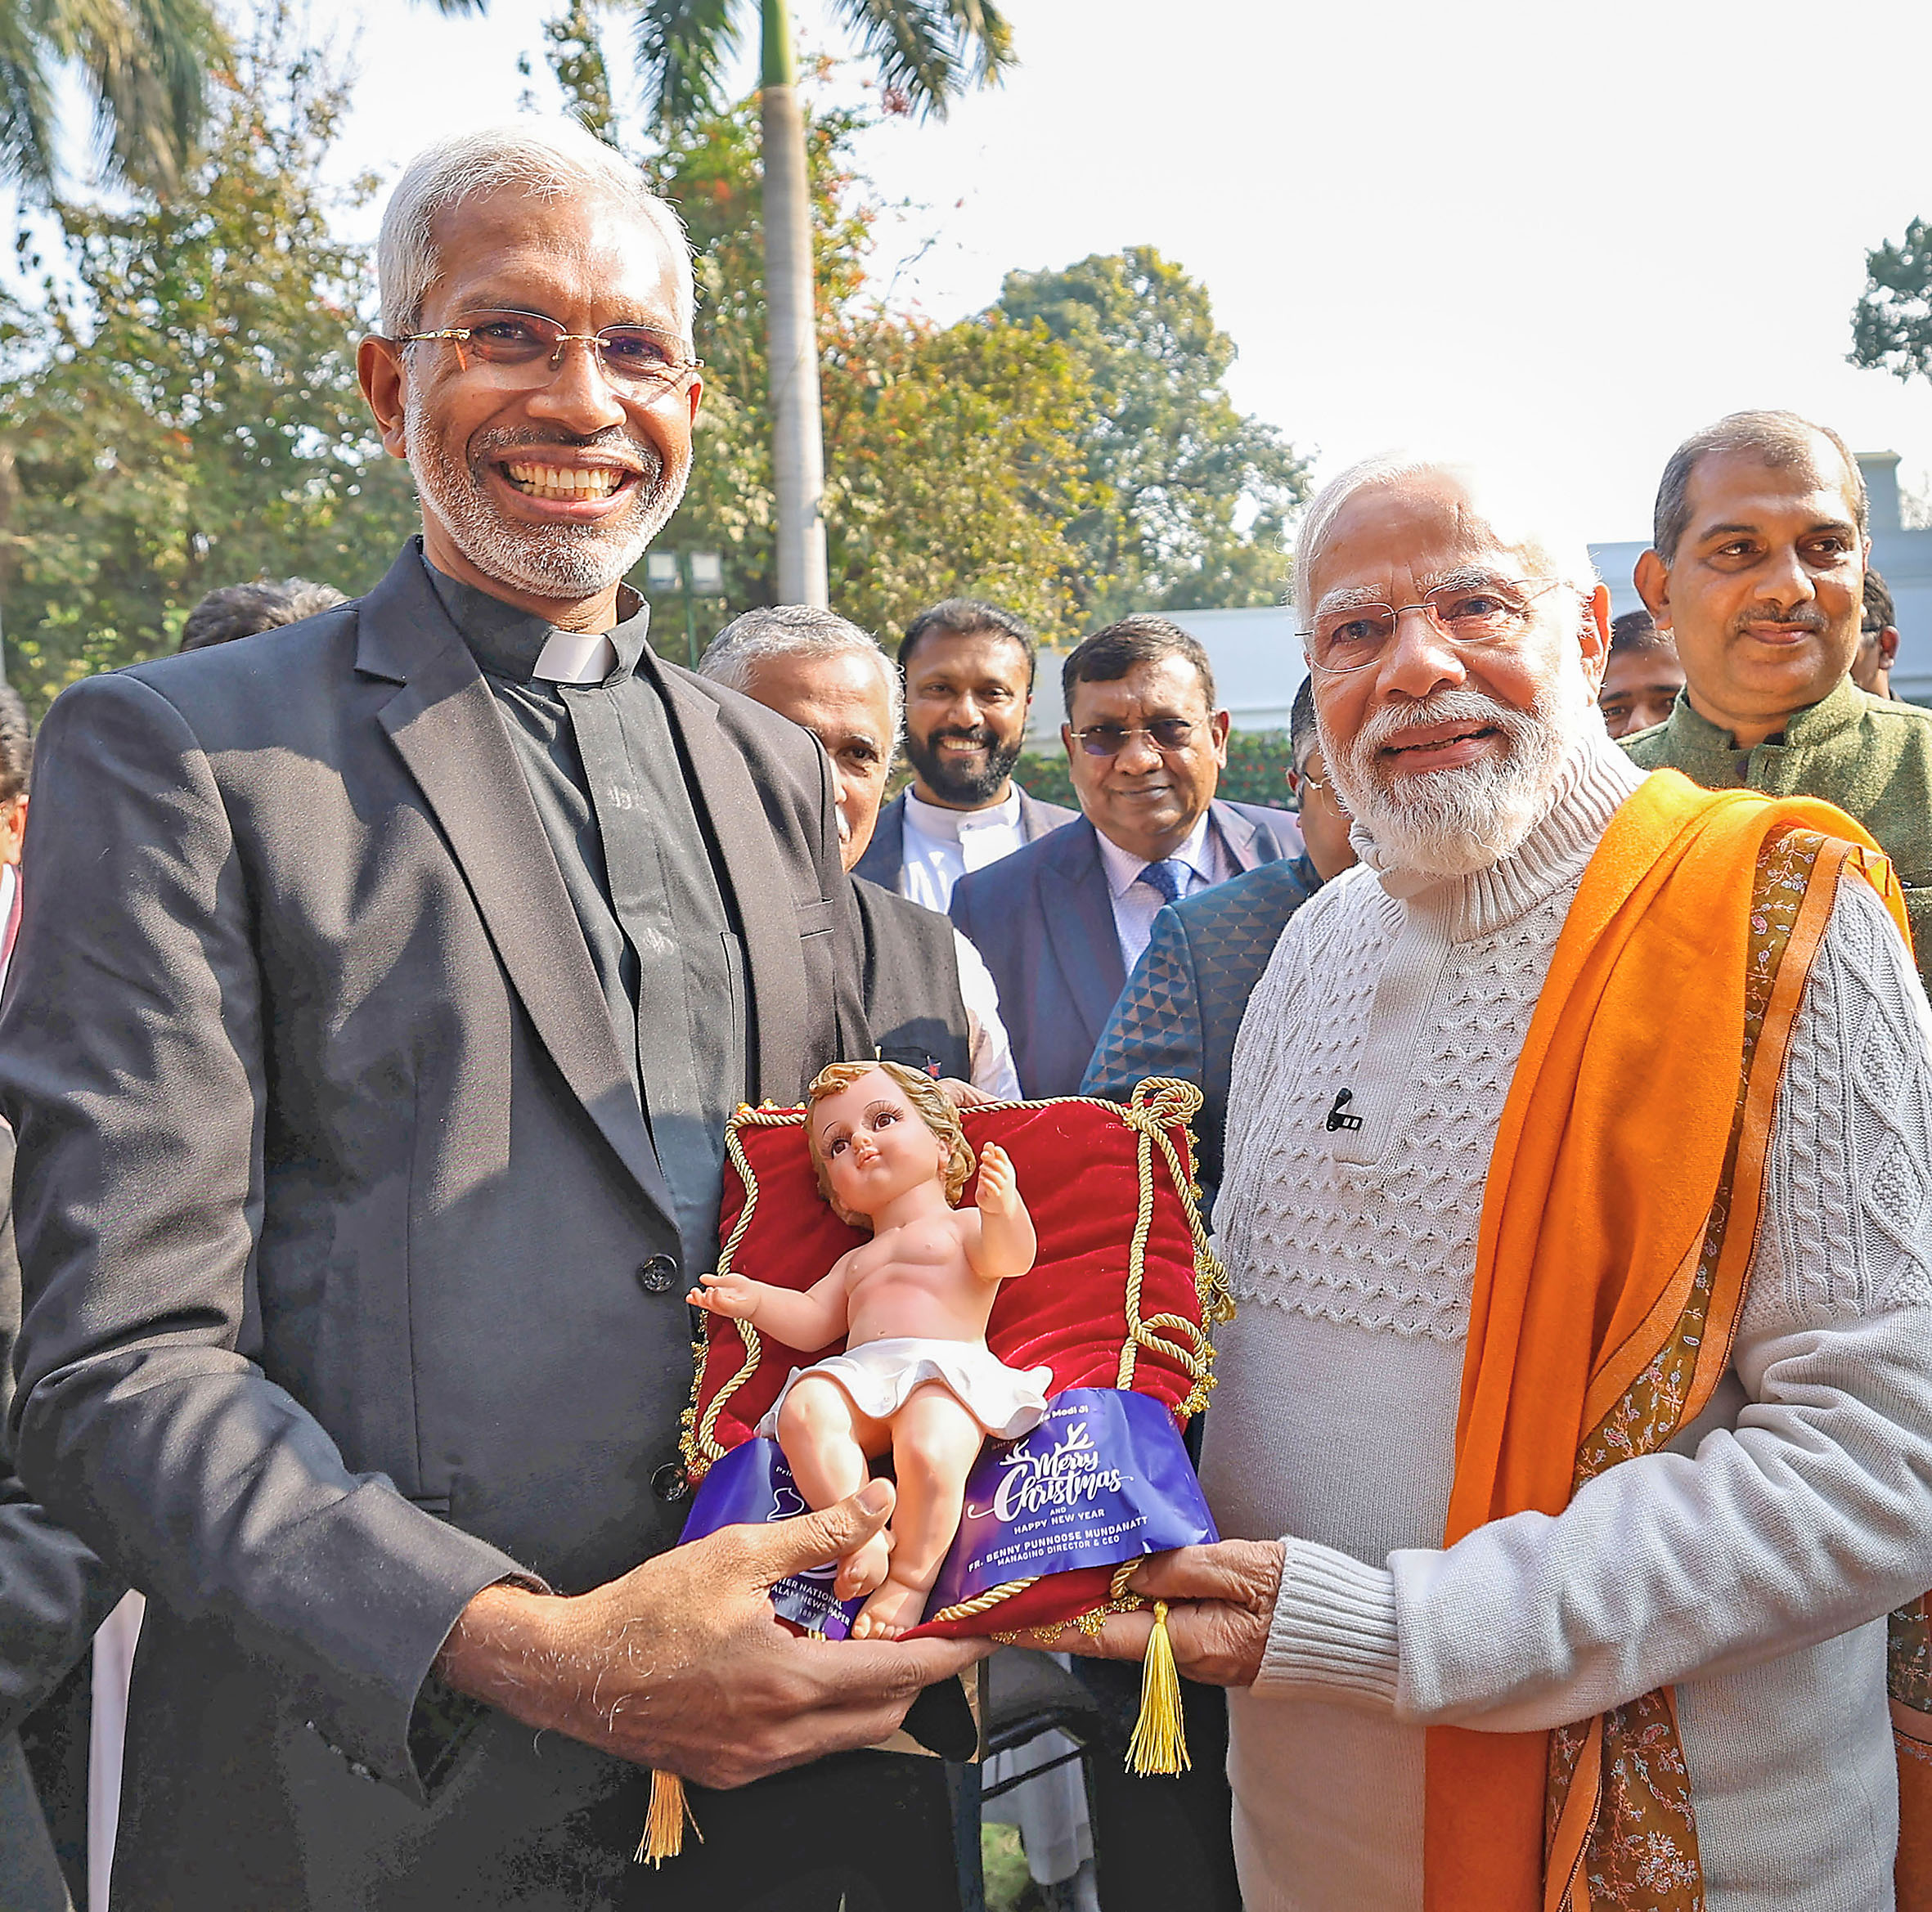 PM Modi being felicitated with an idol of Lord Jesus Christ.